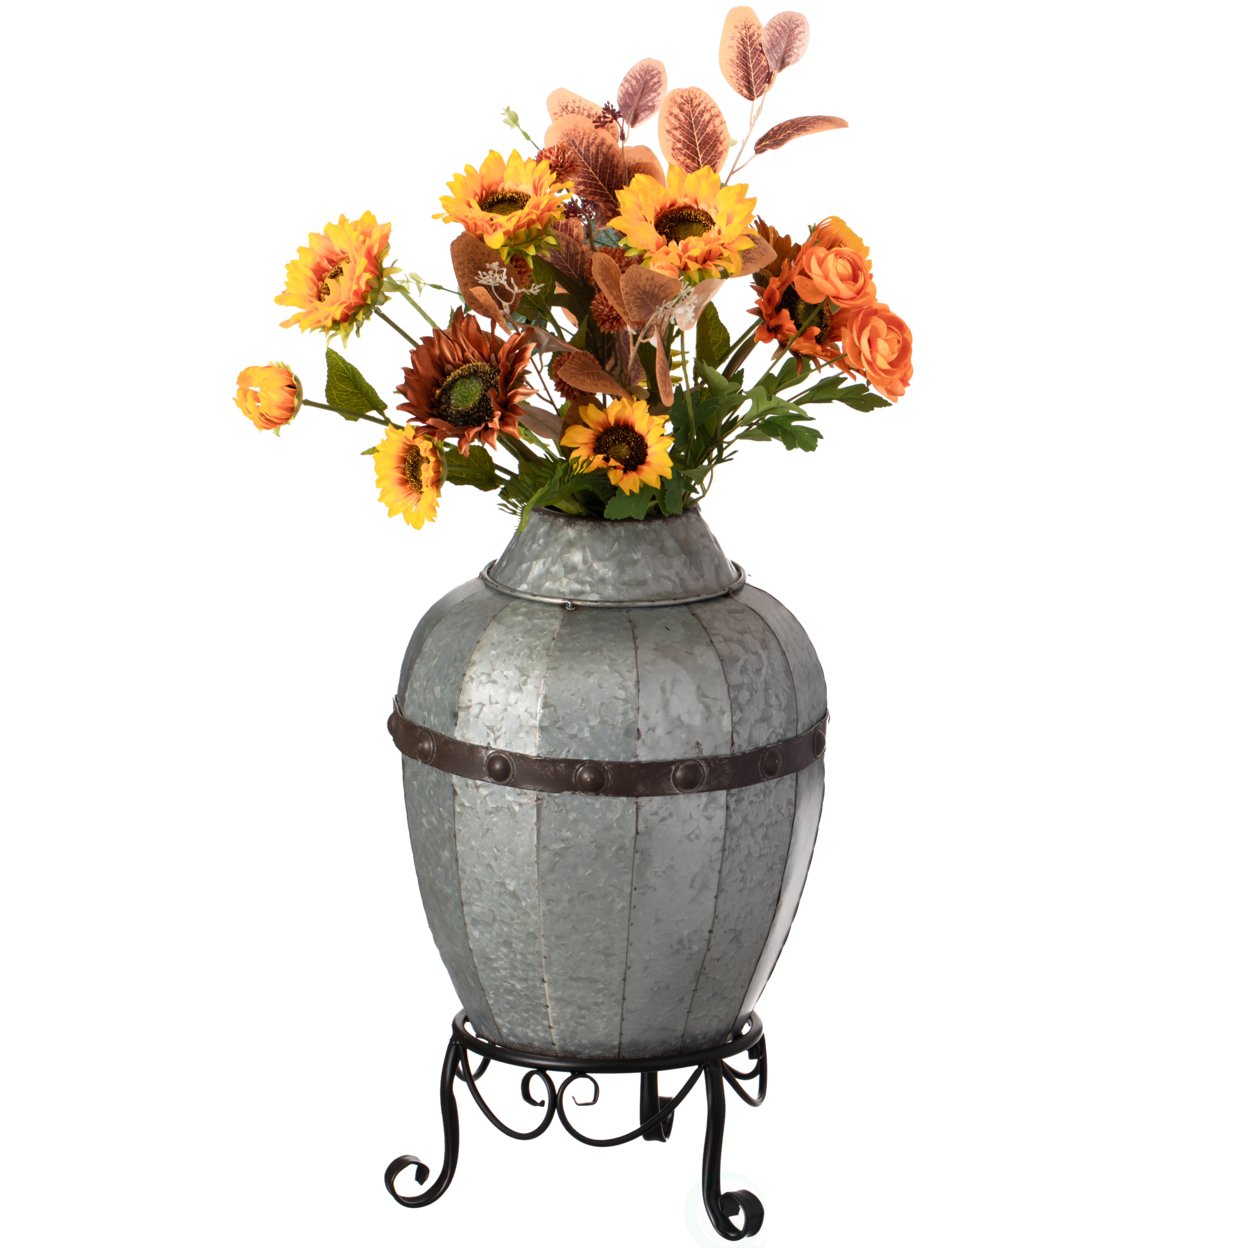 Rustic Silver Galvanized Barrel Shape Planter And Vase With Metal Stand